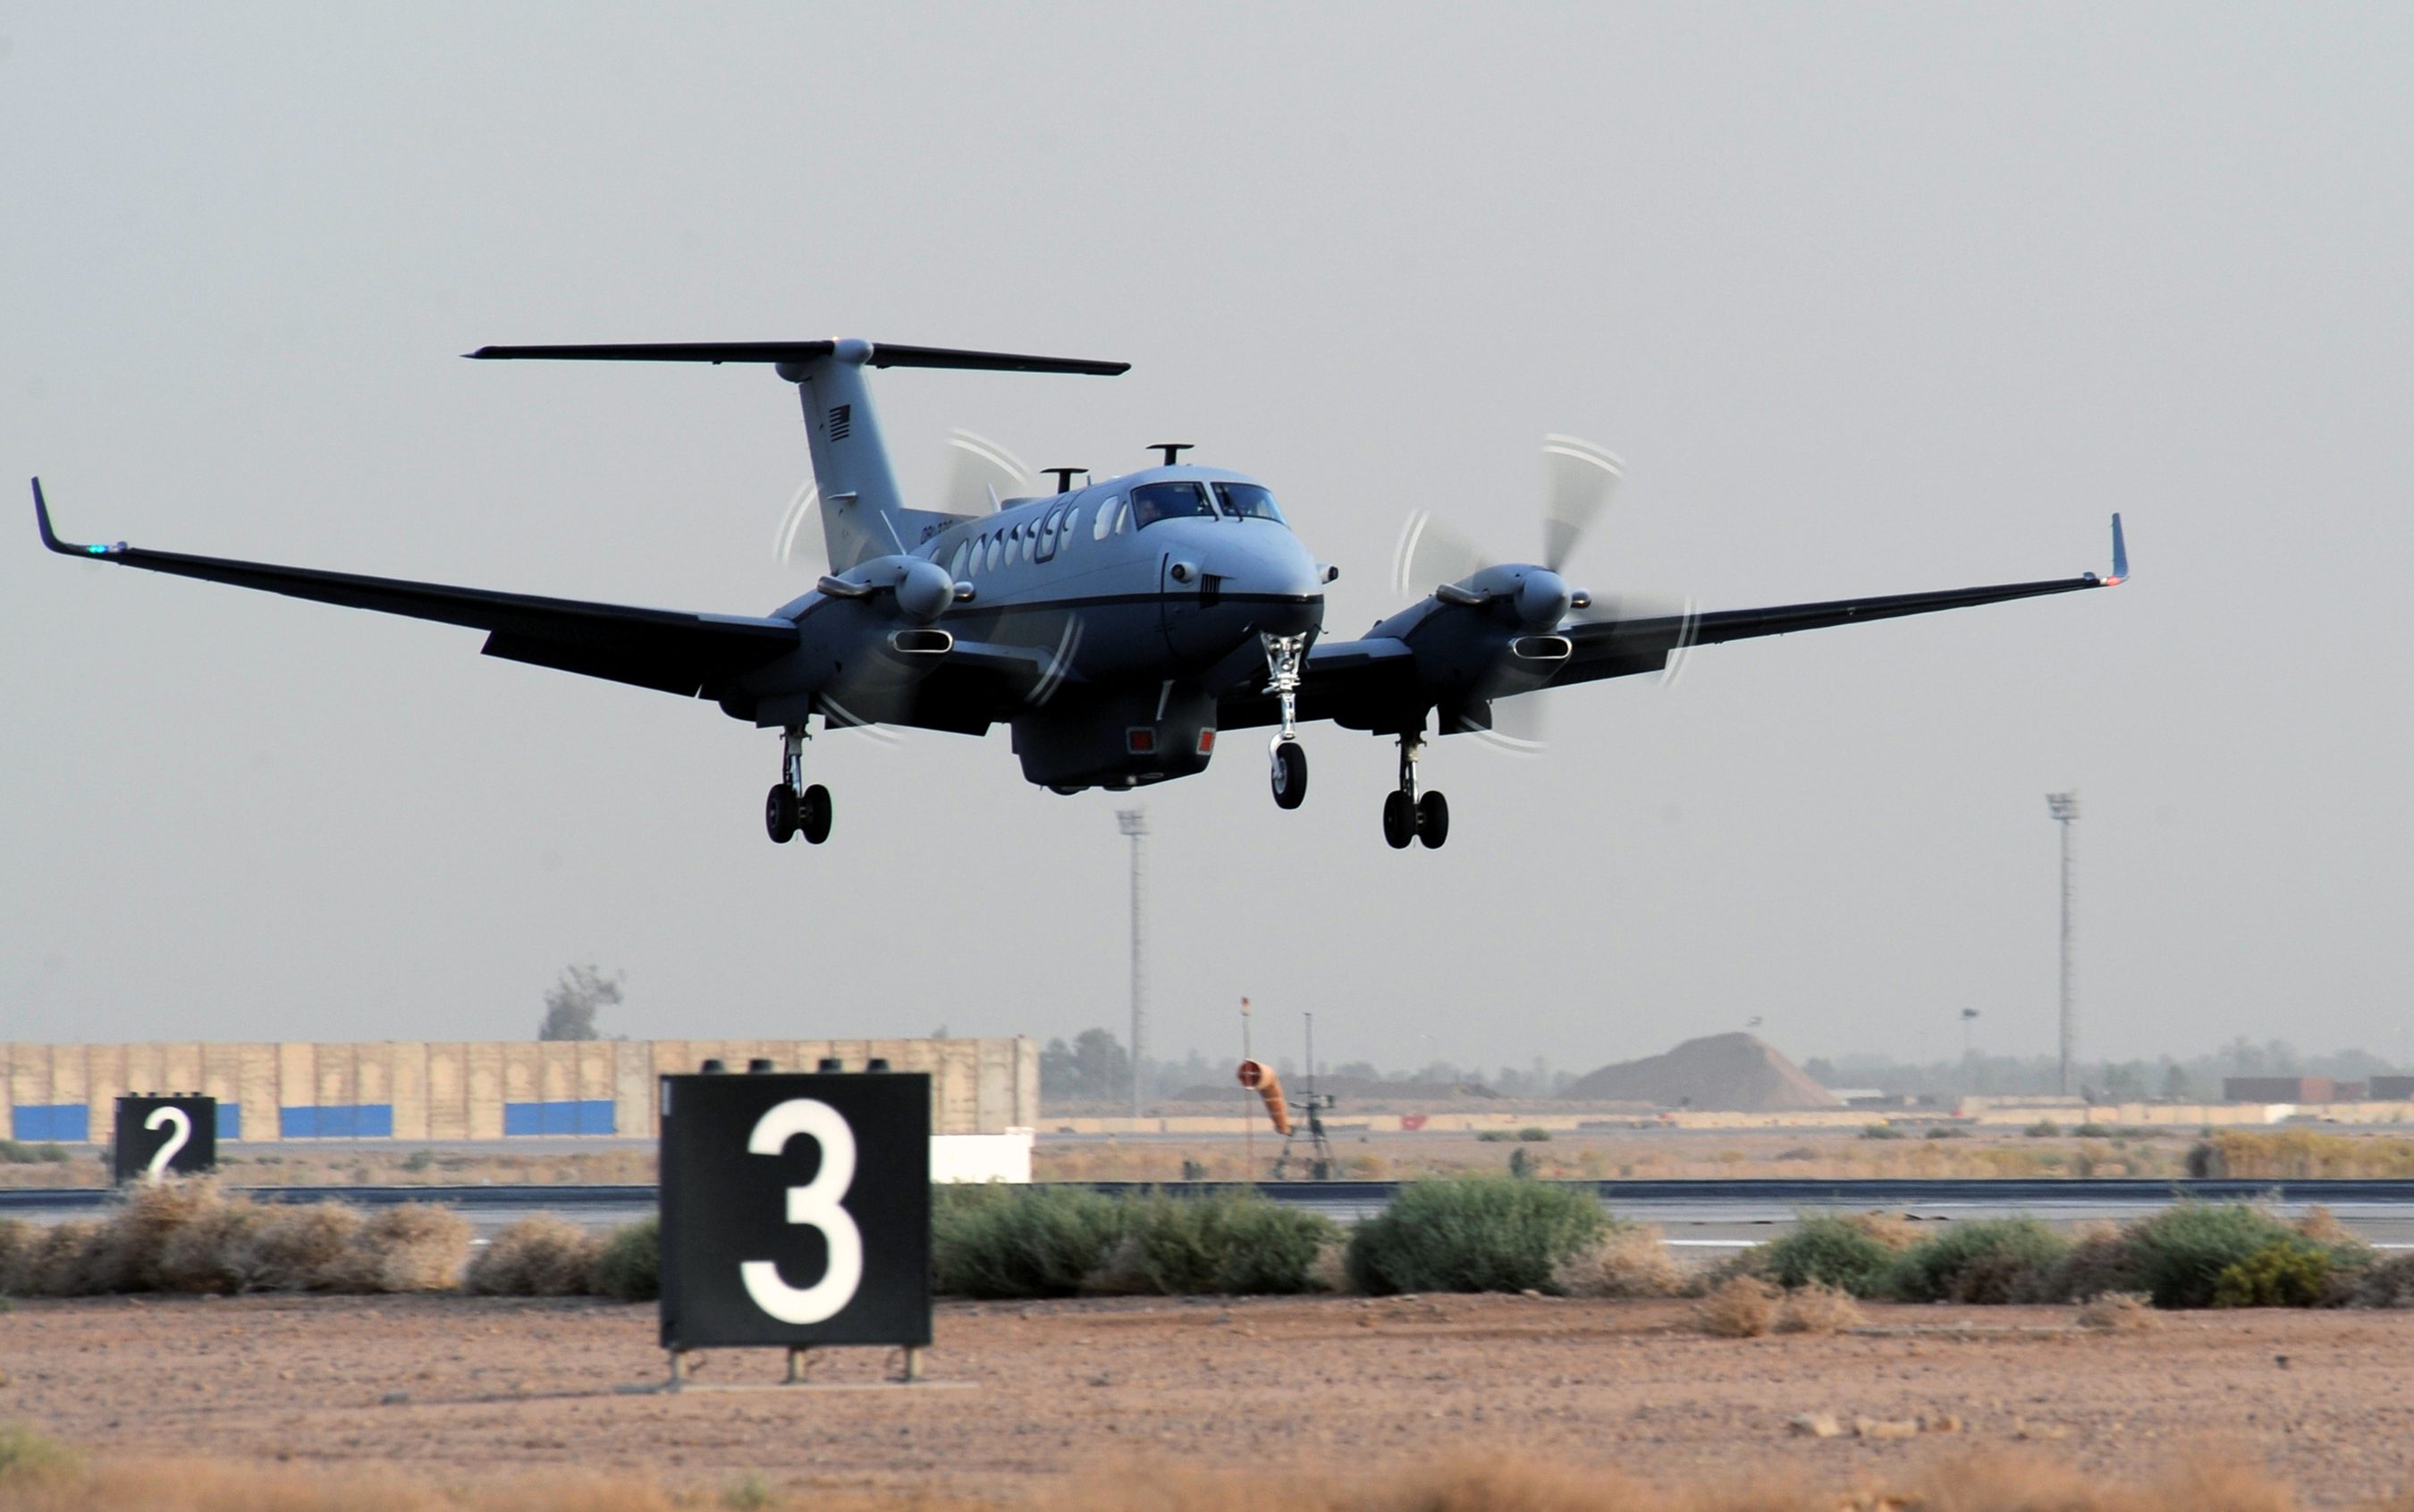 The MC-12 Liberty aircraft is the Air Force's newest intelligence, surveillance and reconnaissance platform. It is a medium-altitude manned special-mission turbo prop aircraft that supports coalition and joint ground forces. (U.S. Air Force photo/Senior Airman Tiffany Trojca)